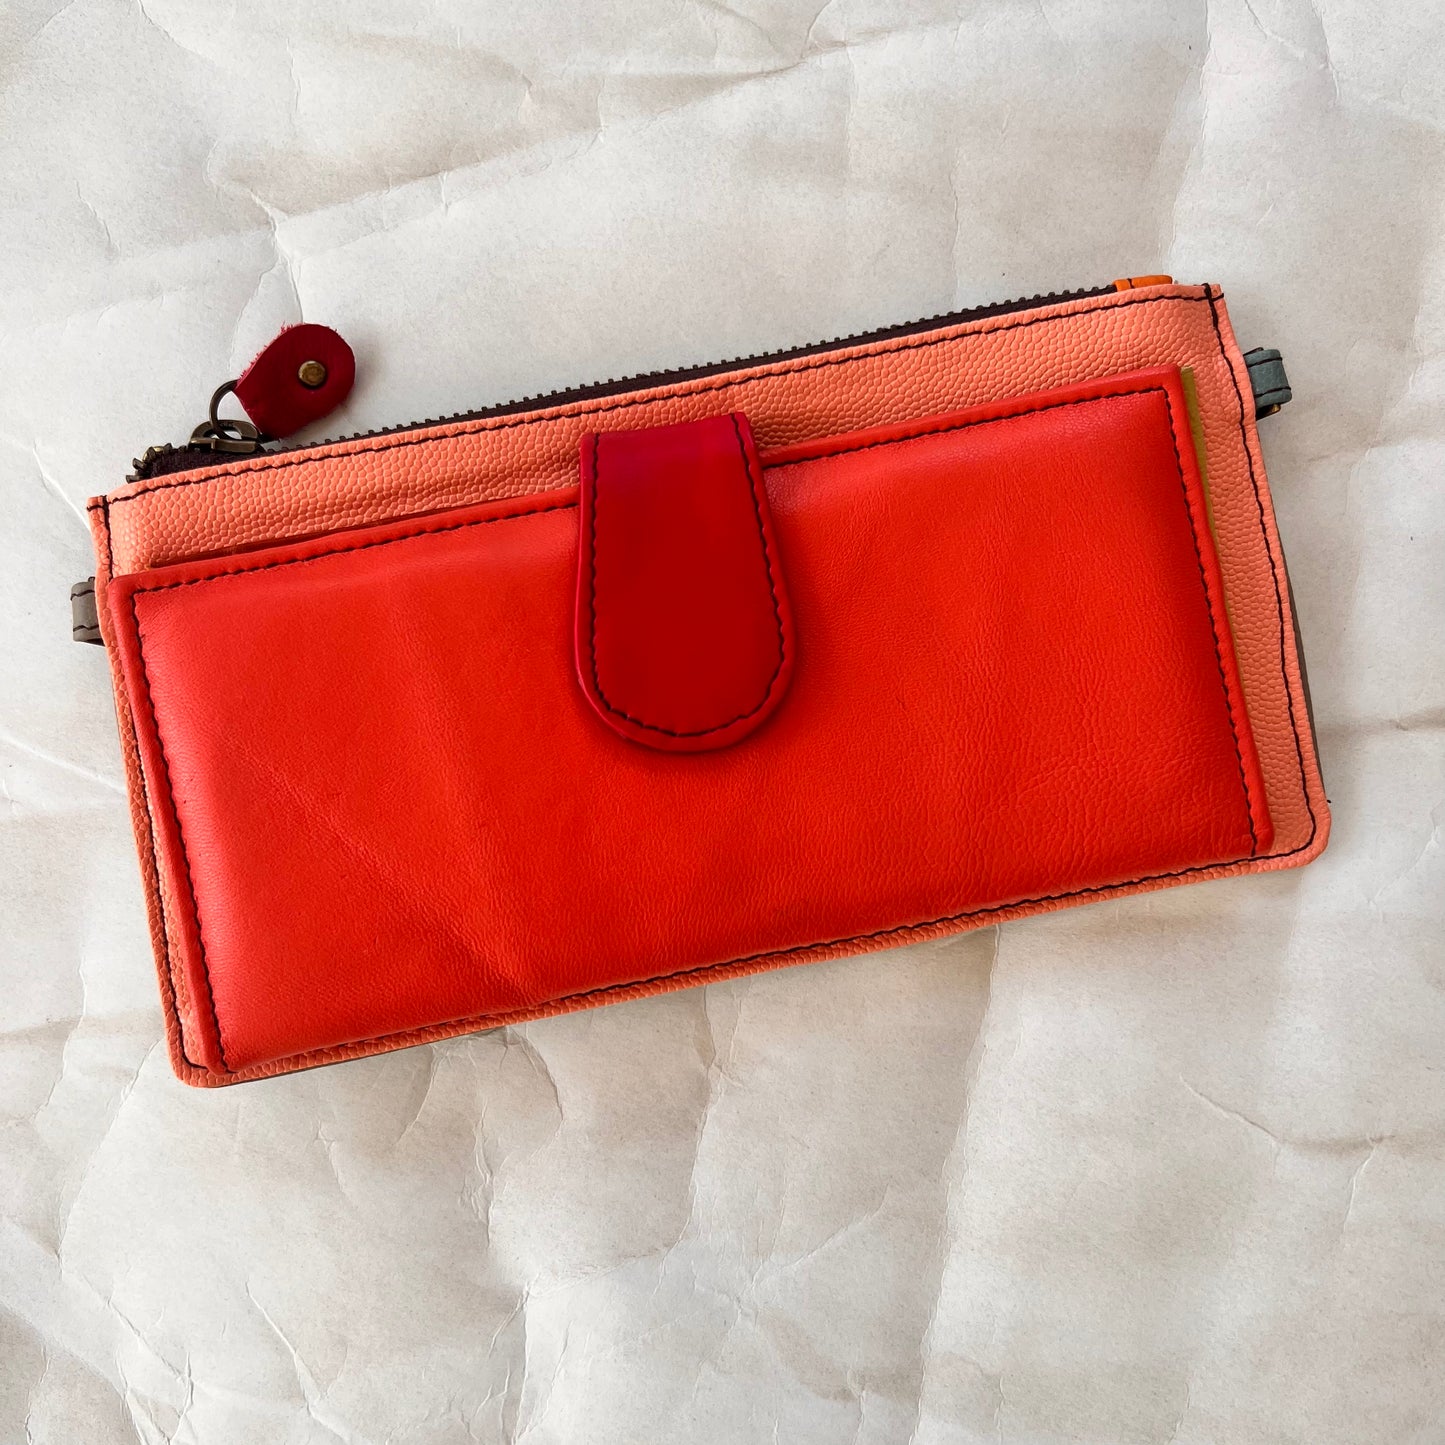 rectanglar kimber peach wallet with coral pocket and red tab closure.